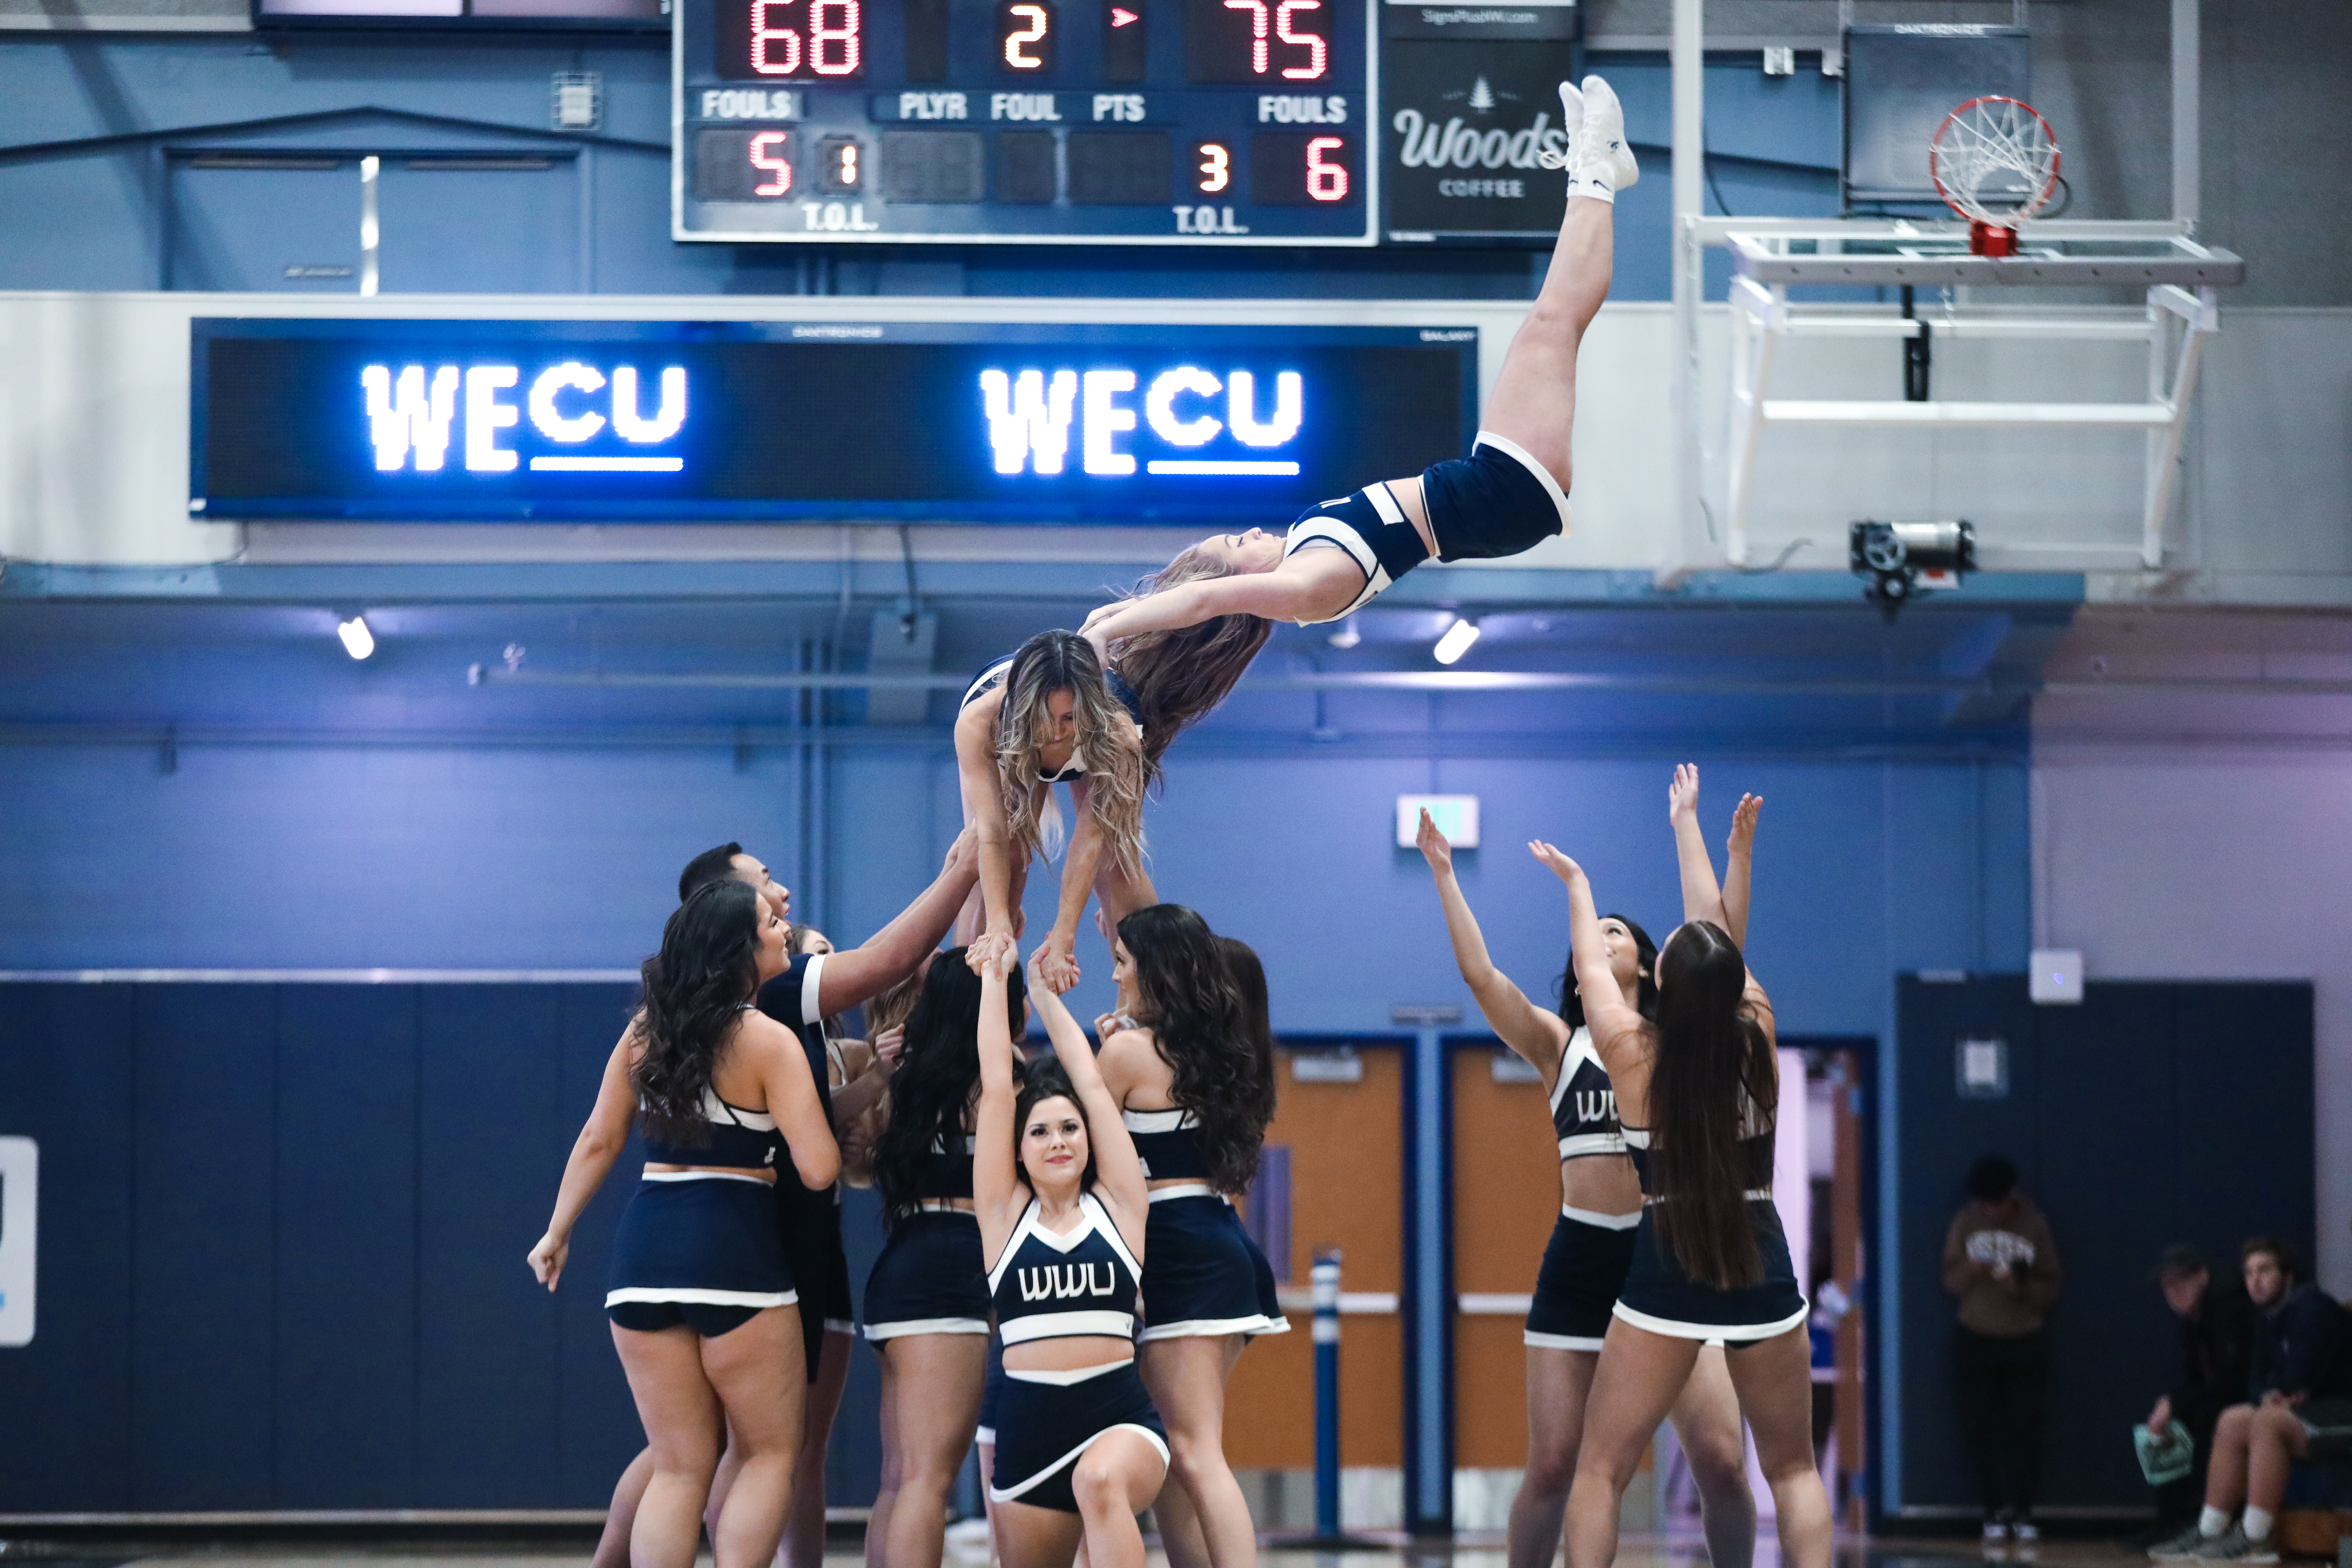 Cheerleaders perform a group tumbling routine with one in the midst of dropping from a handstand at the top of a human pyramid into the arms of teammates. 